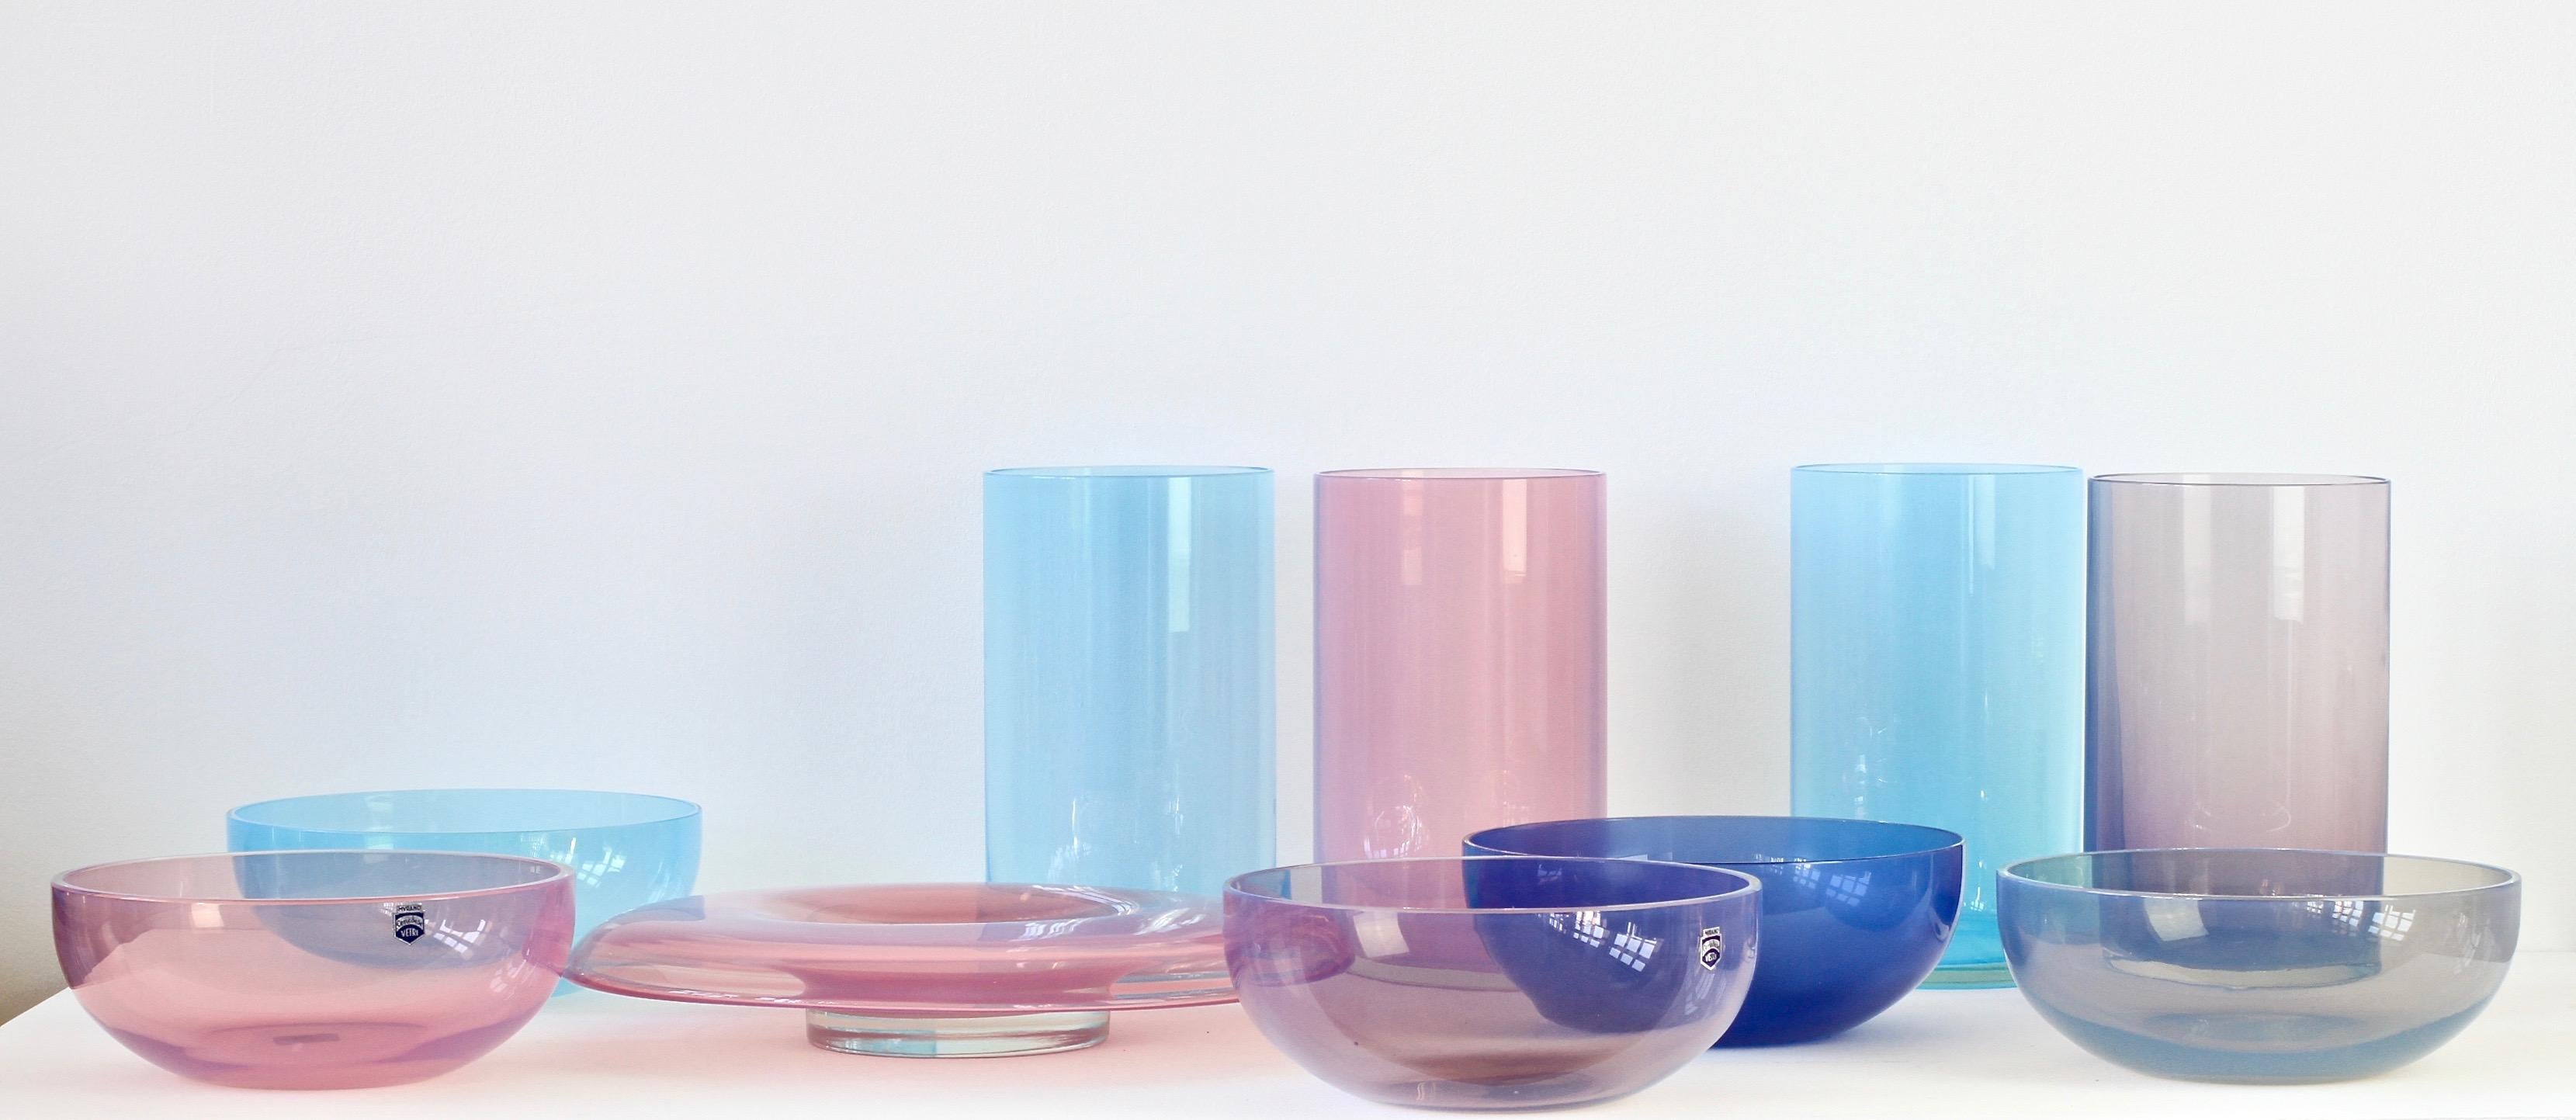 Extraordinarily rare signed set or ensemble of 'Opalino' Murano glass bowls, vases and vessels designed by Antonio da Ros (1936-2012) for Cenedese, circa 1970-1990. Wonderful translucent colors of vibrant blues, aubergine, moss green and pink.